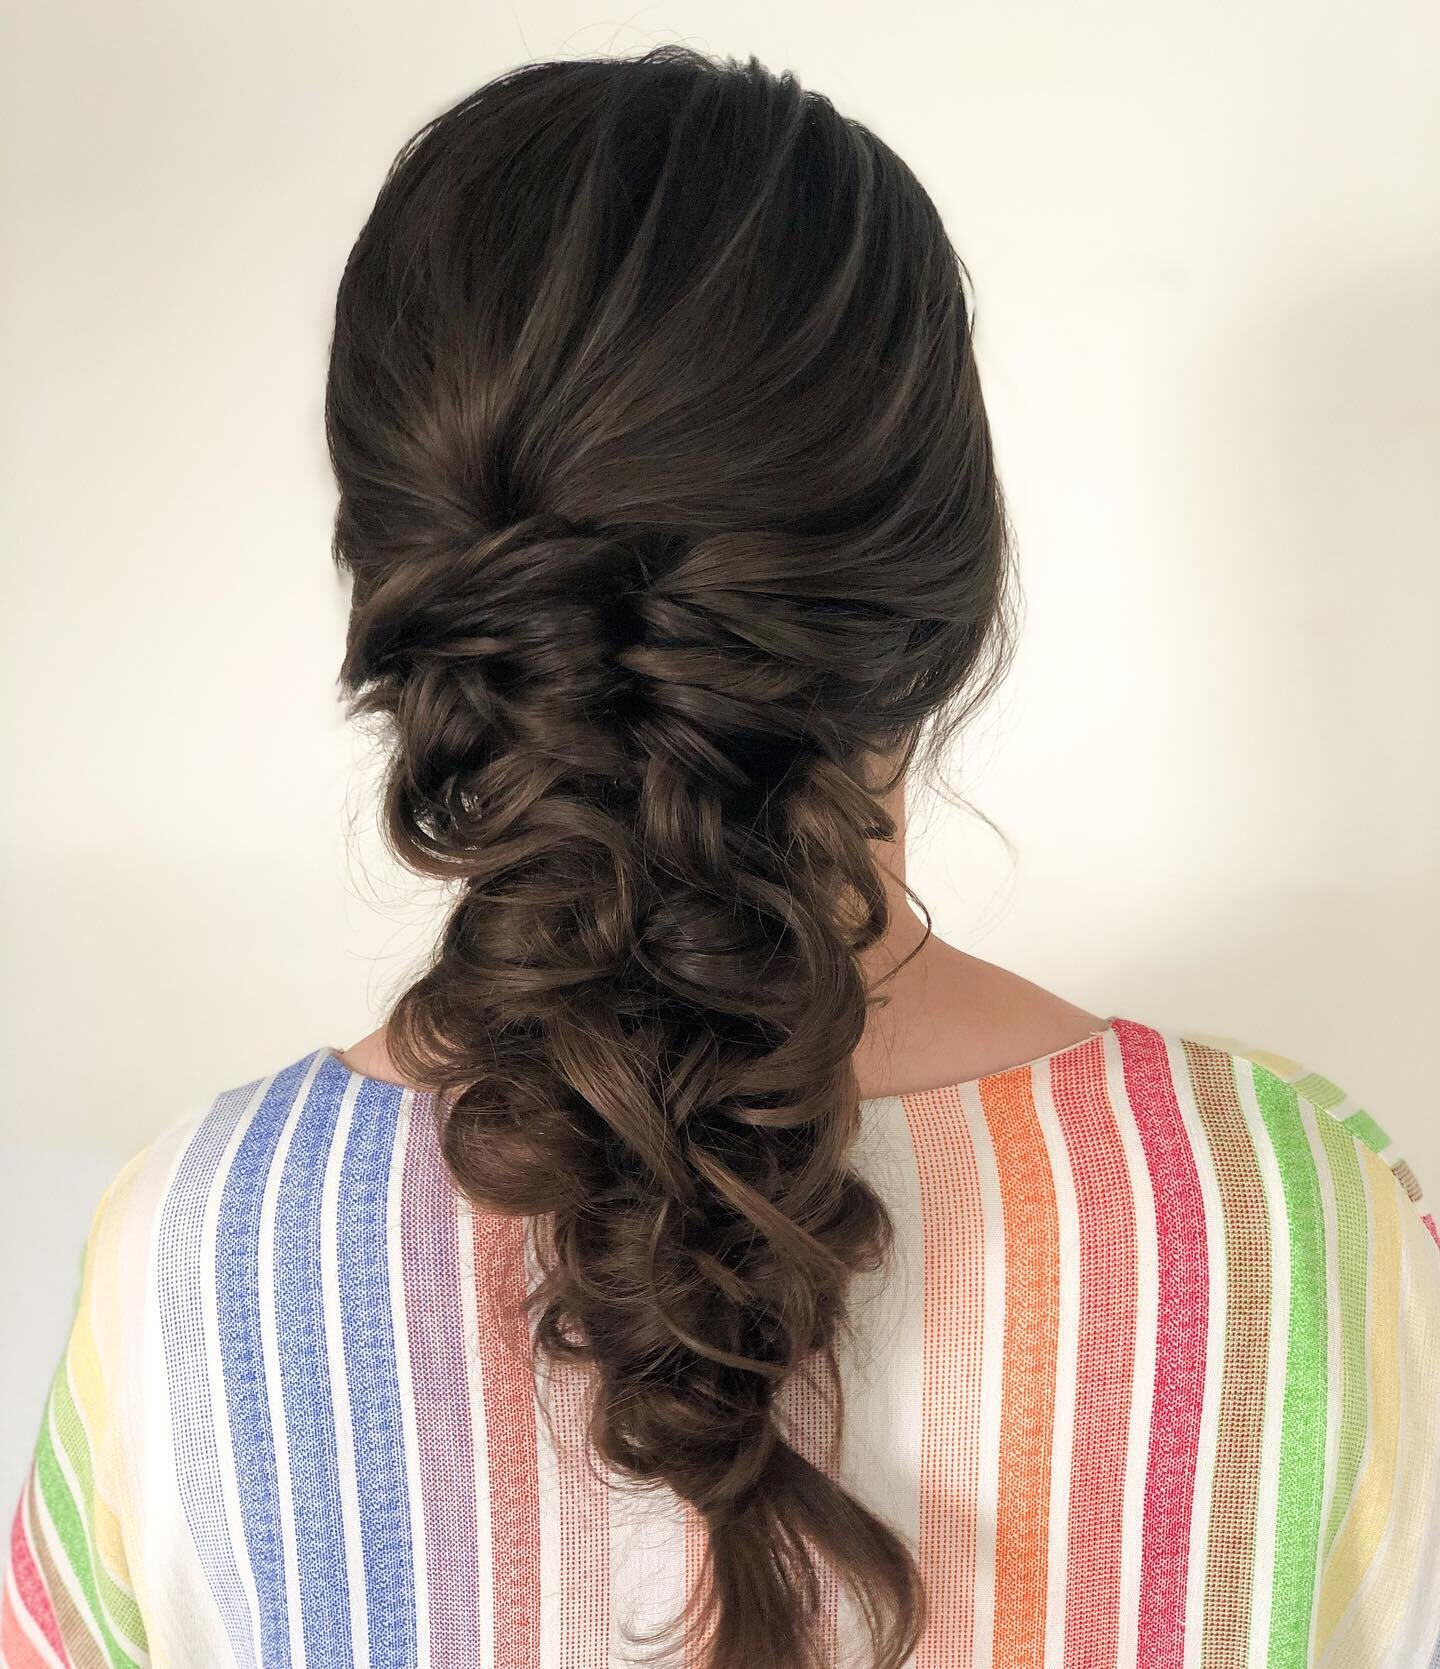 This might be my new favorite style, a boho yet chic, bridal-worthy bubble braid✨ thanks for being my sweet model @mrschristinesherman